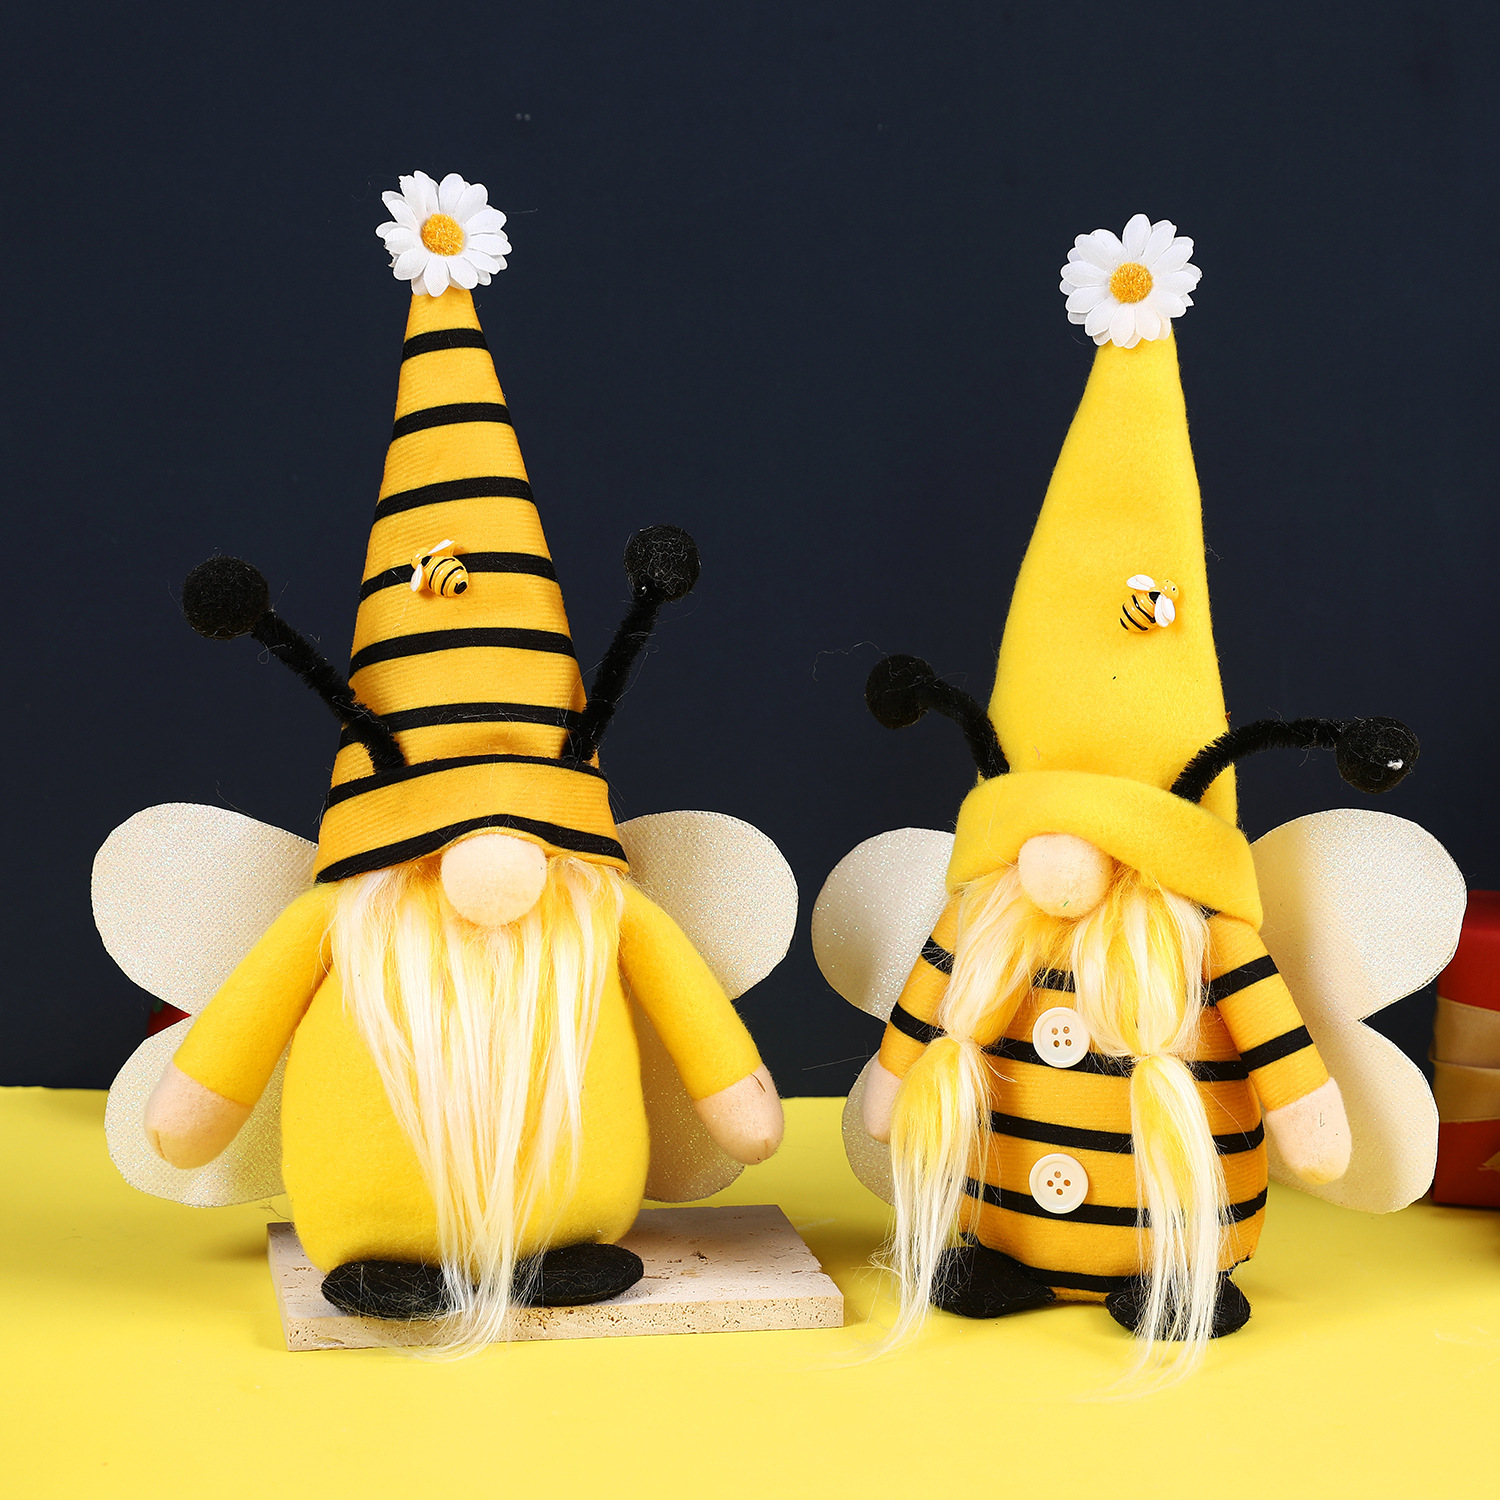 Event Plushies Bee Festival Faceless Doll: Unique & Charming Ornament for Home